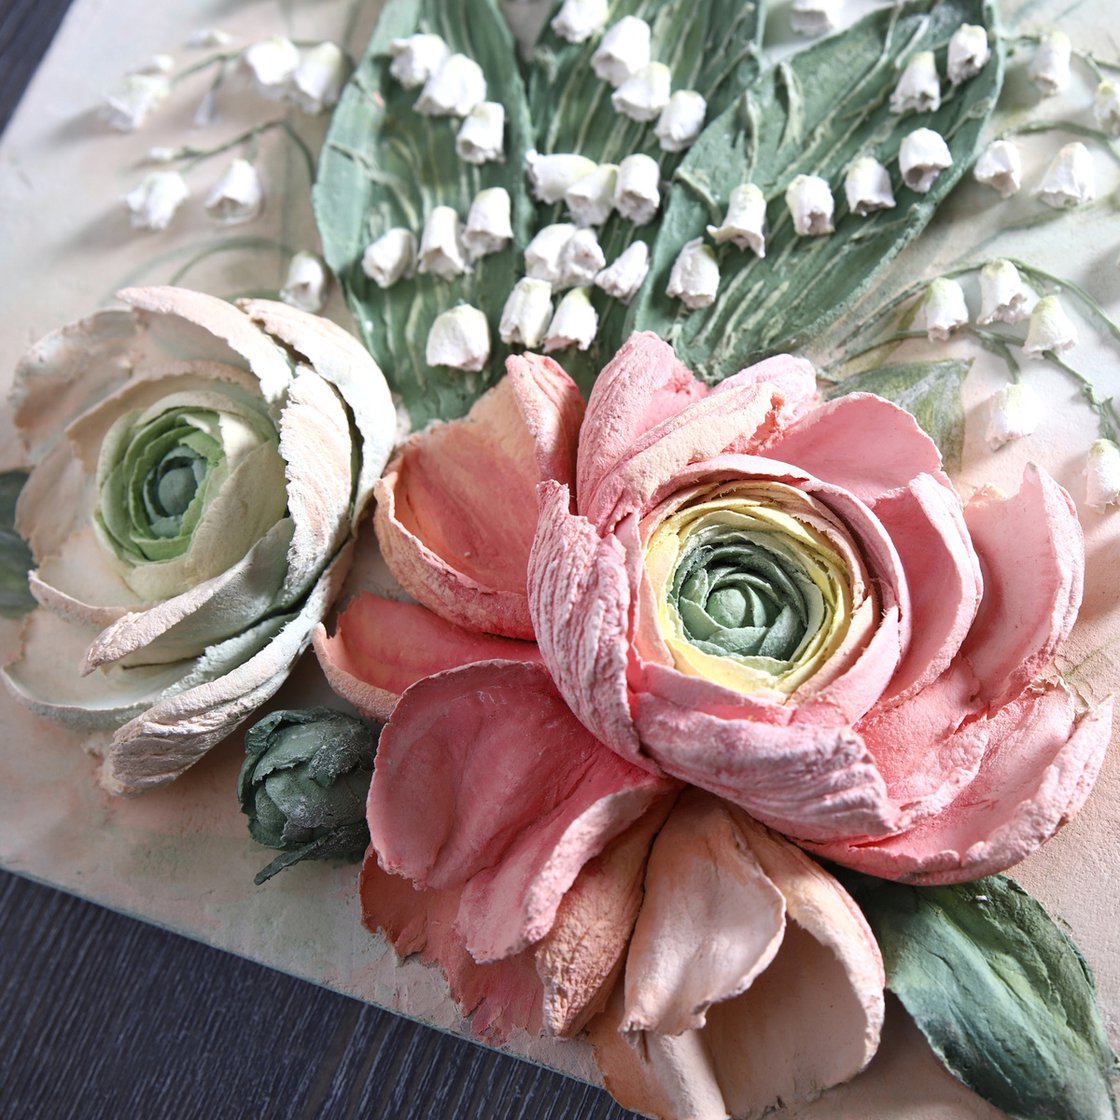 CLASS101+  Unfading beauty, paper flowers for special occasions